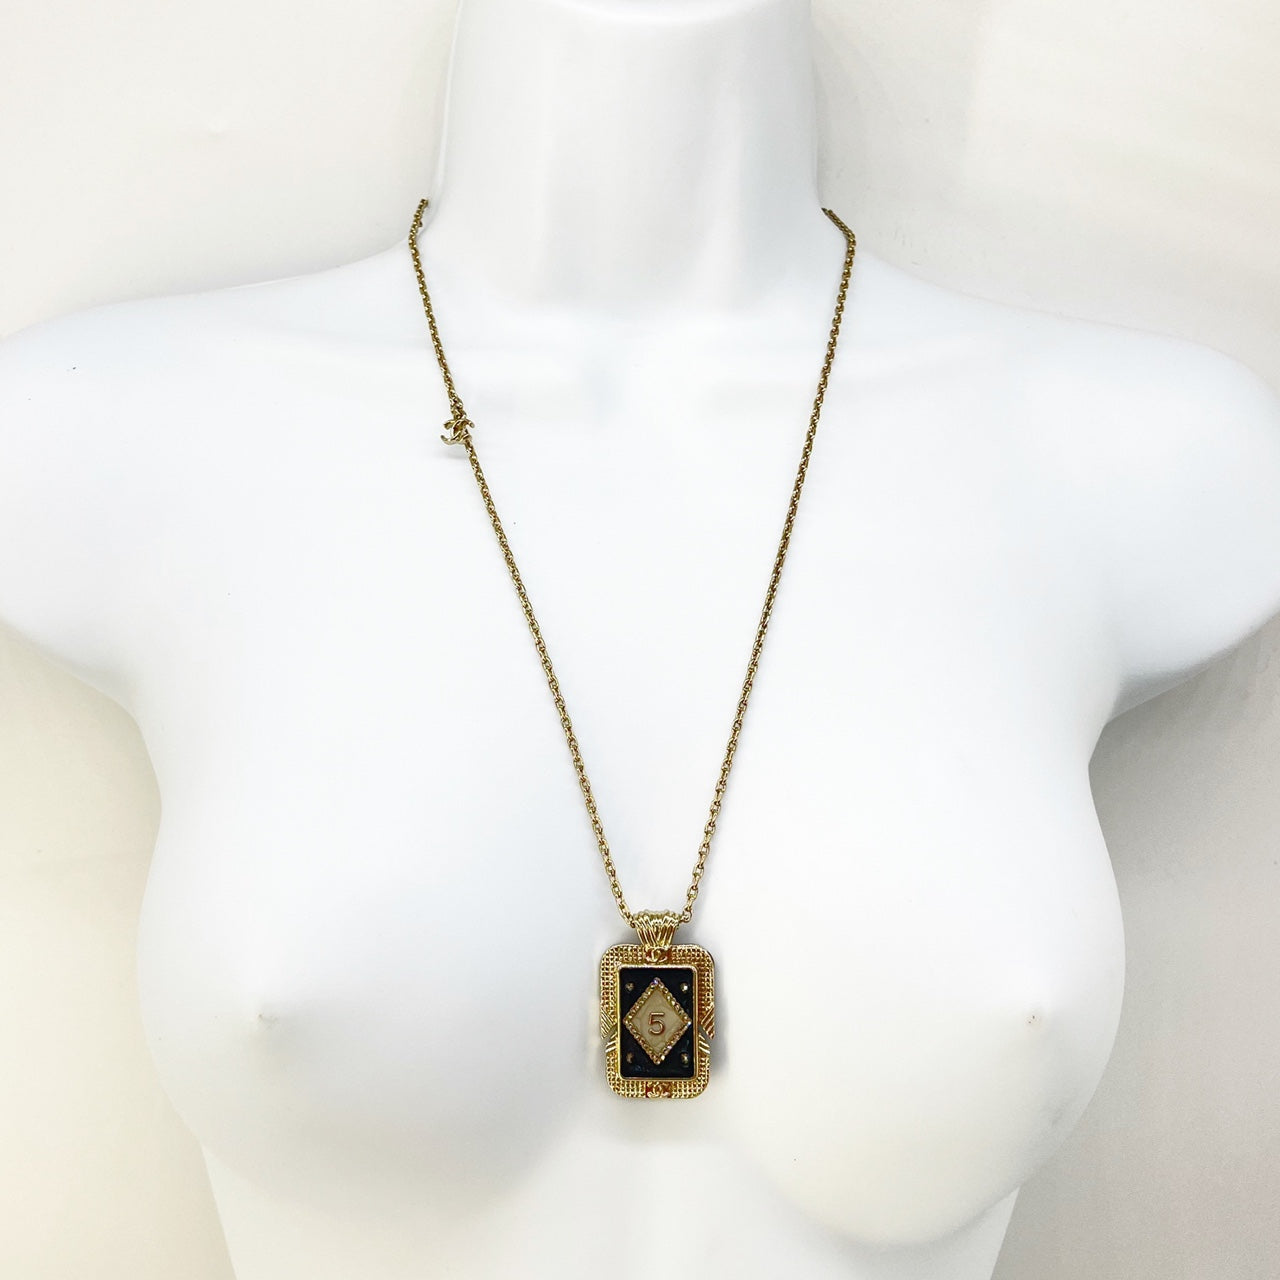 Guarantee Authentic Chanel Crystal No.5 Perfume Bottle Rectangle Pendant Reversible Gold Tone Necklace